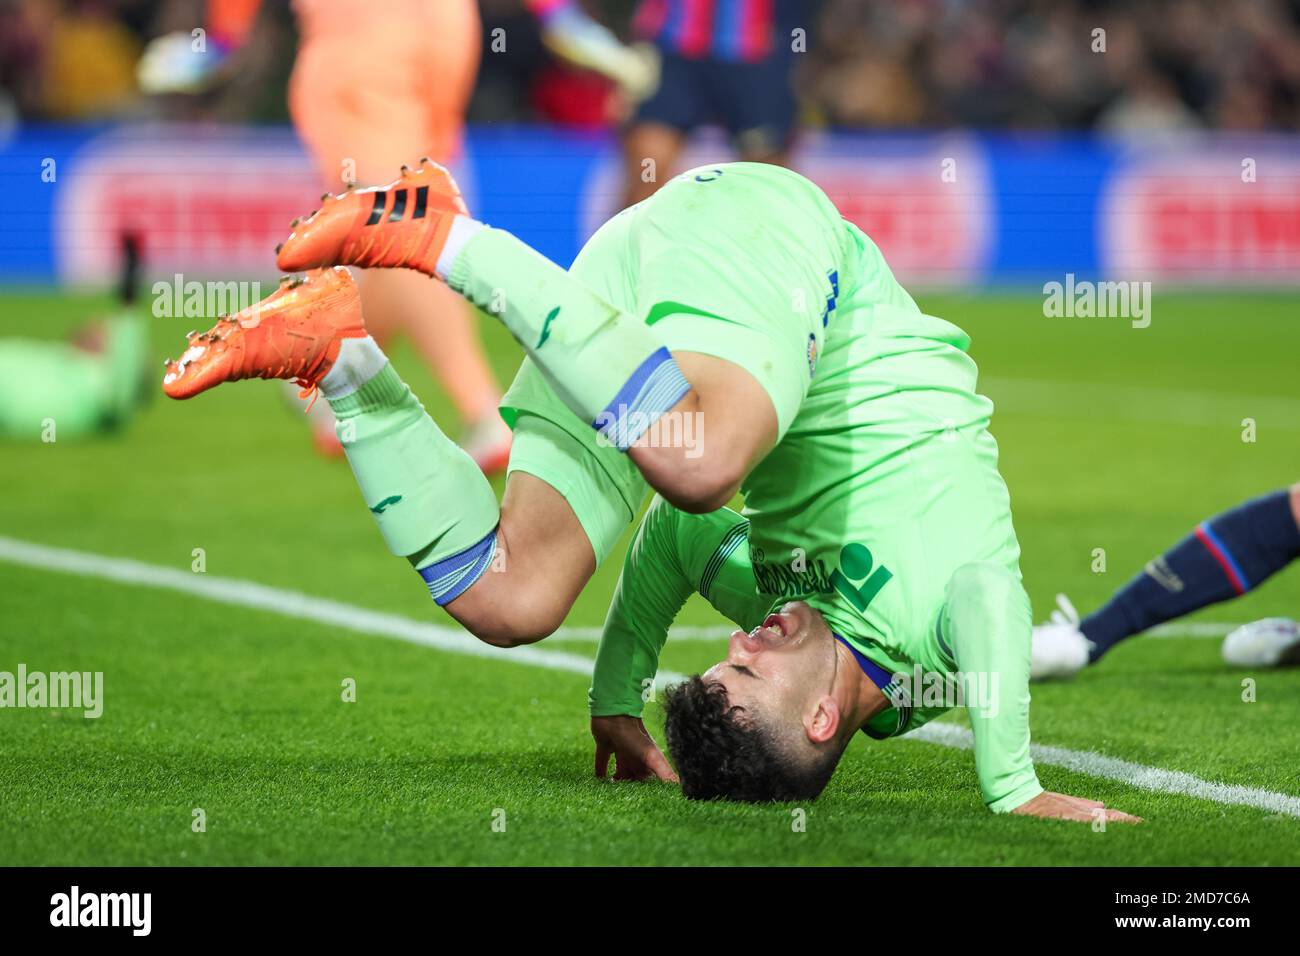 Carles Alena of Getafe CF during the Liga match between FC Barcelona and Getafe CF at Spotify Camp Nou in Barcelona, Spain. Stock Photo